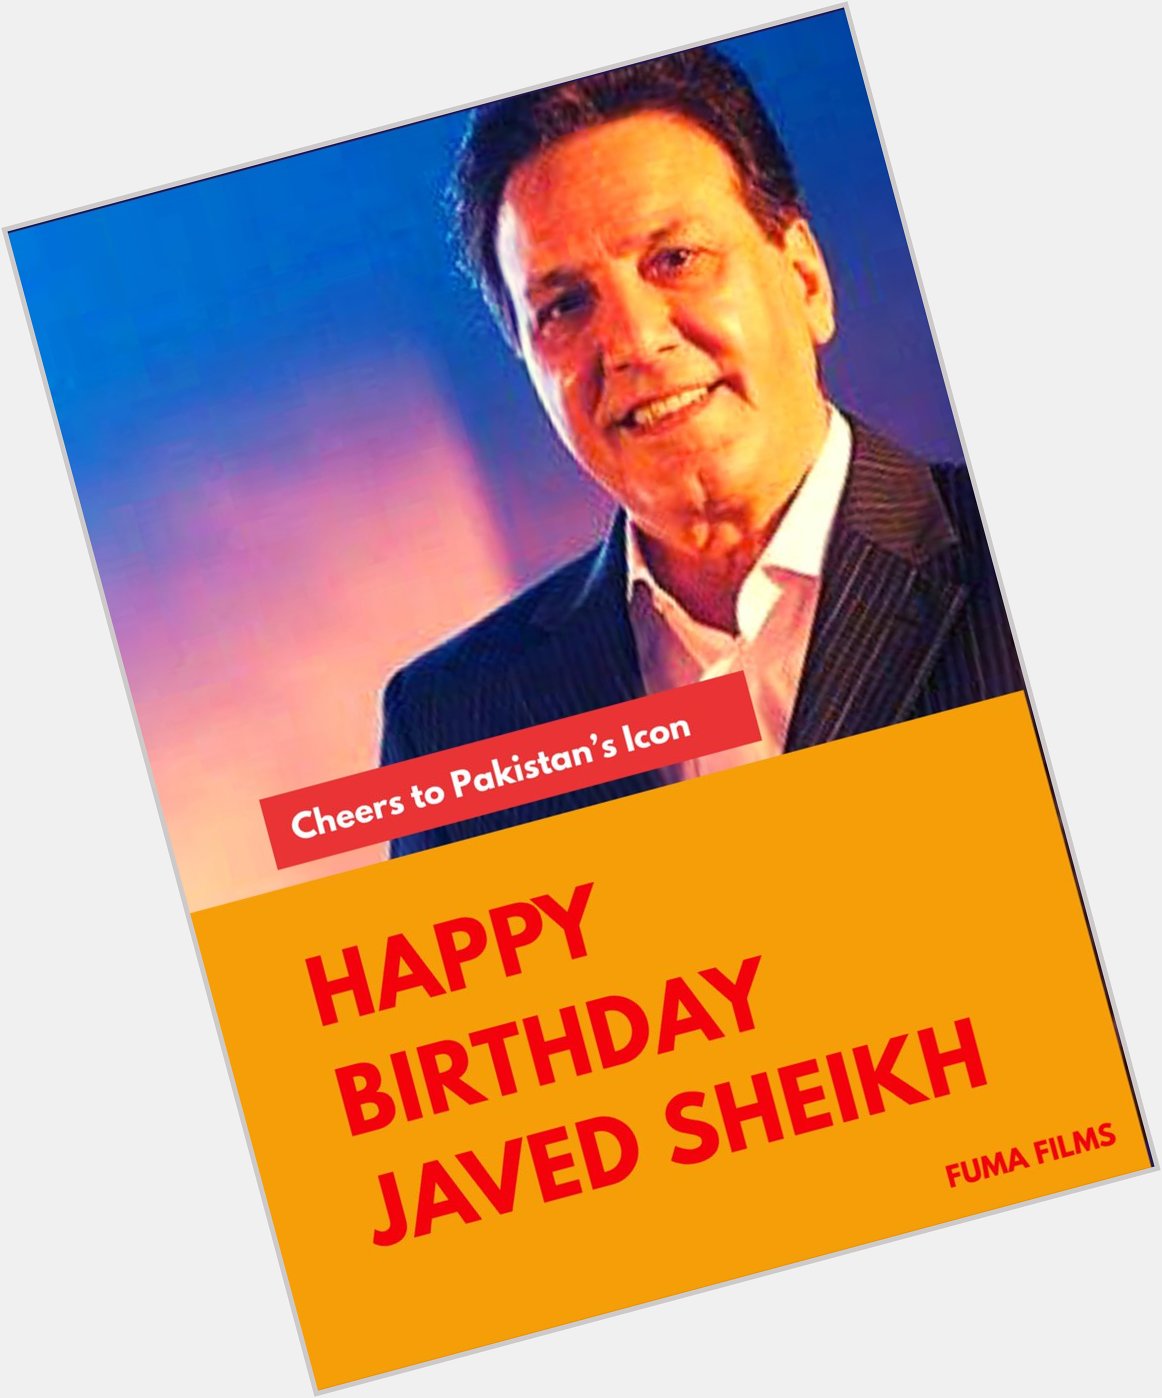 Happy birthday to the Iconic actor of Javed Sheikh! 